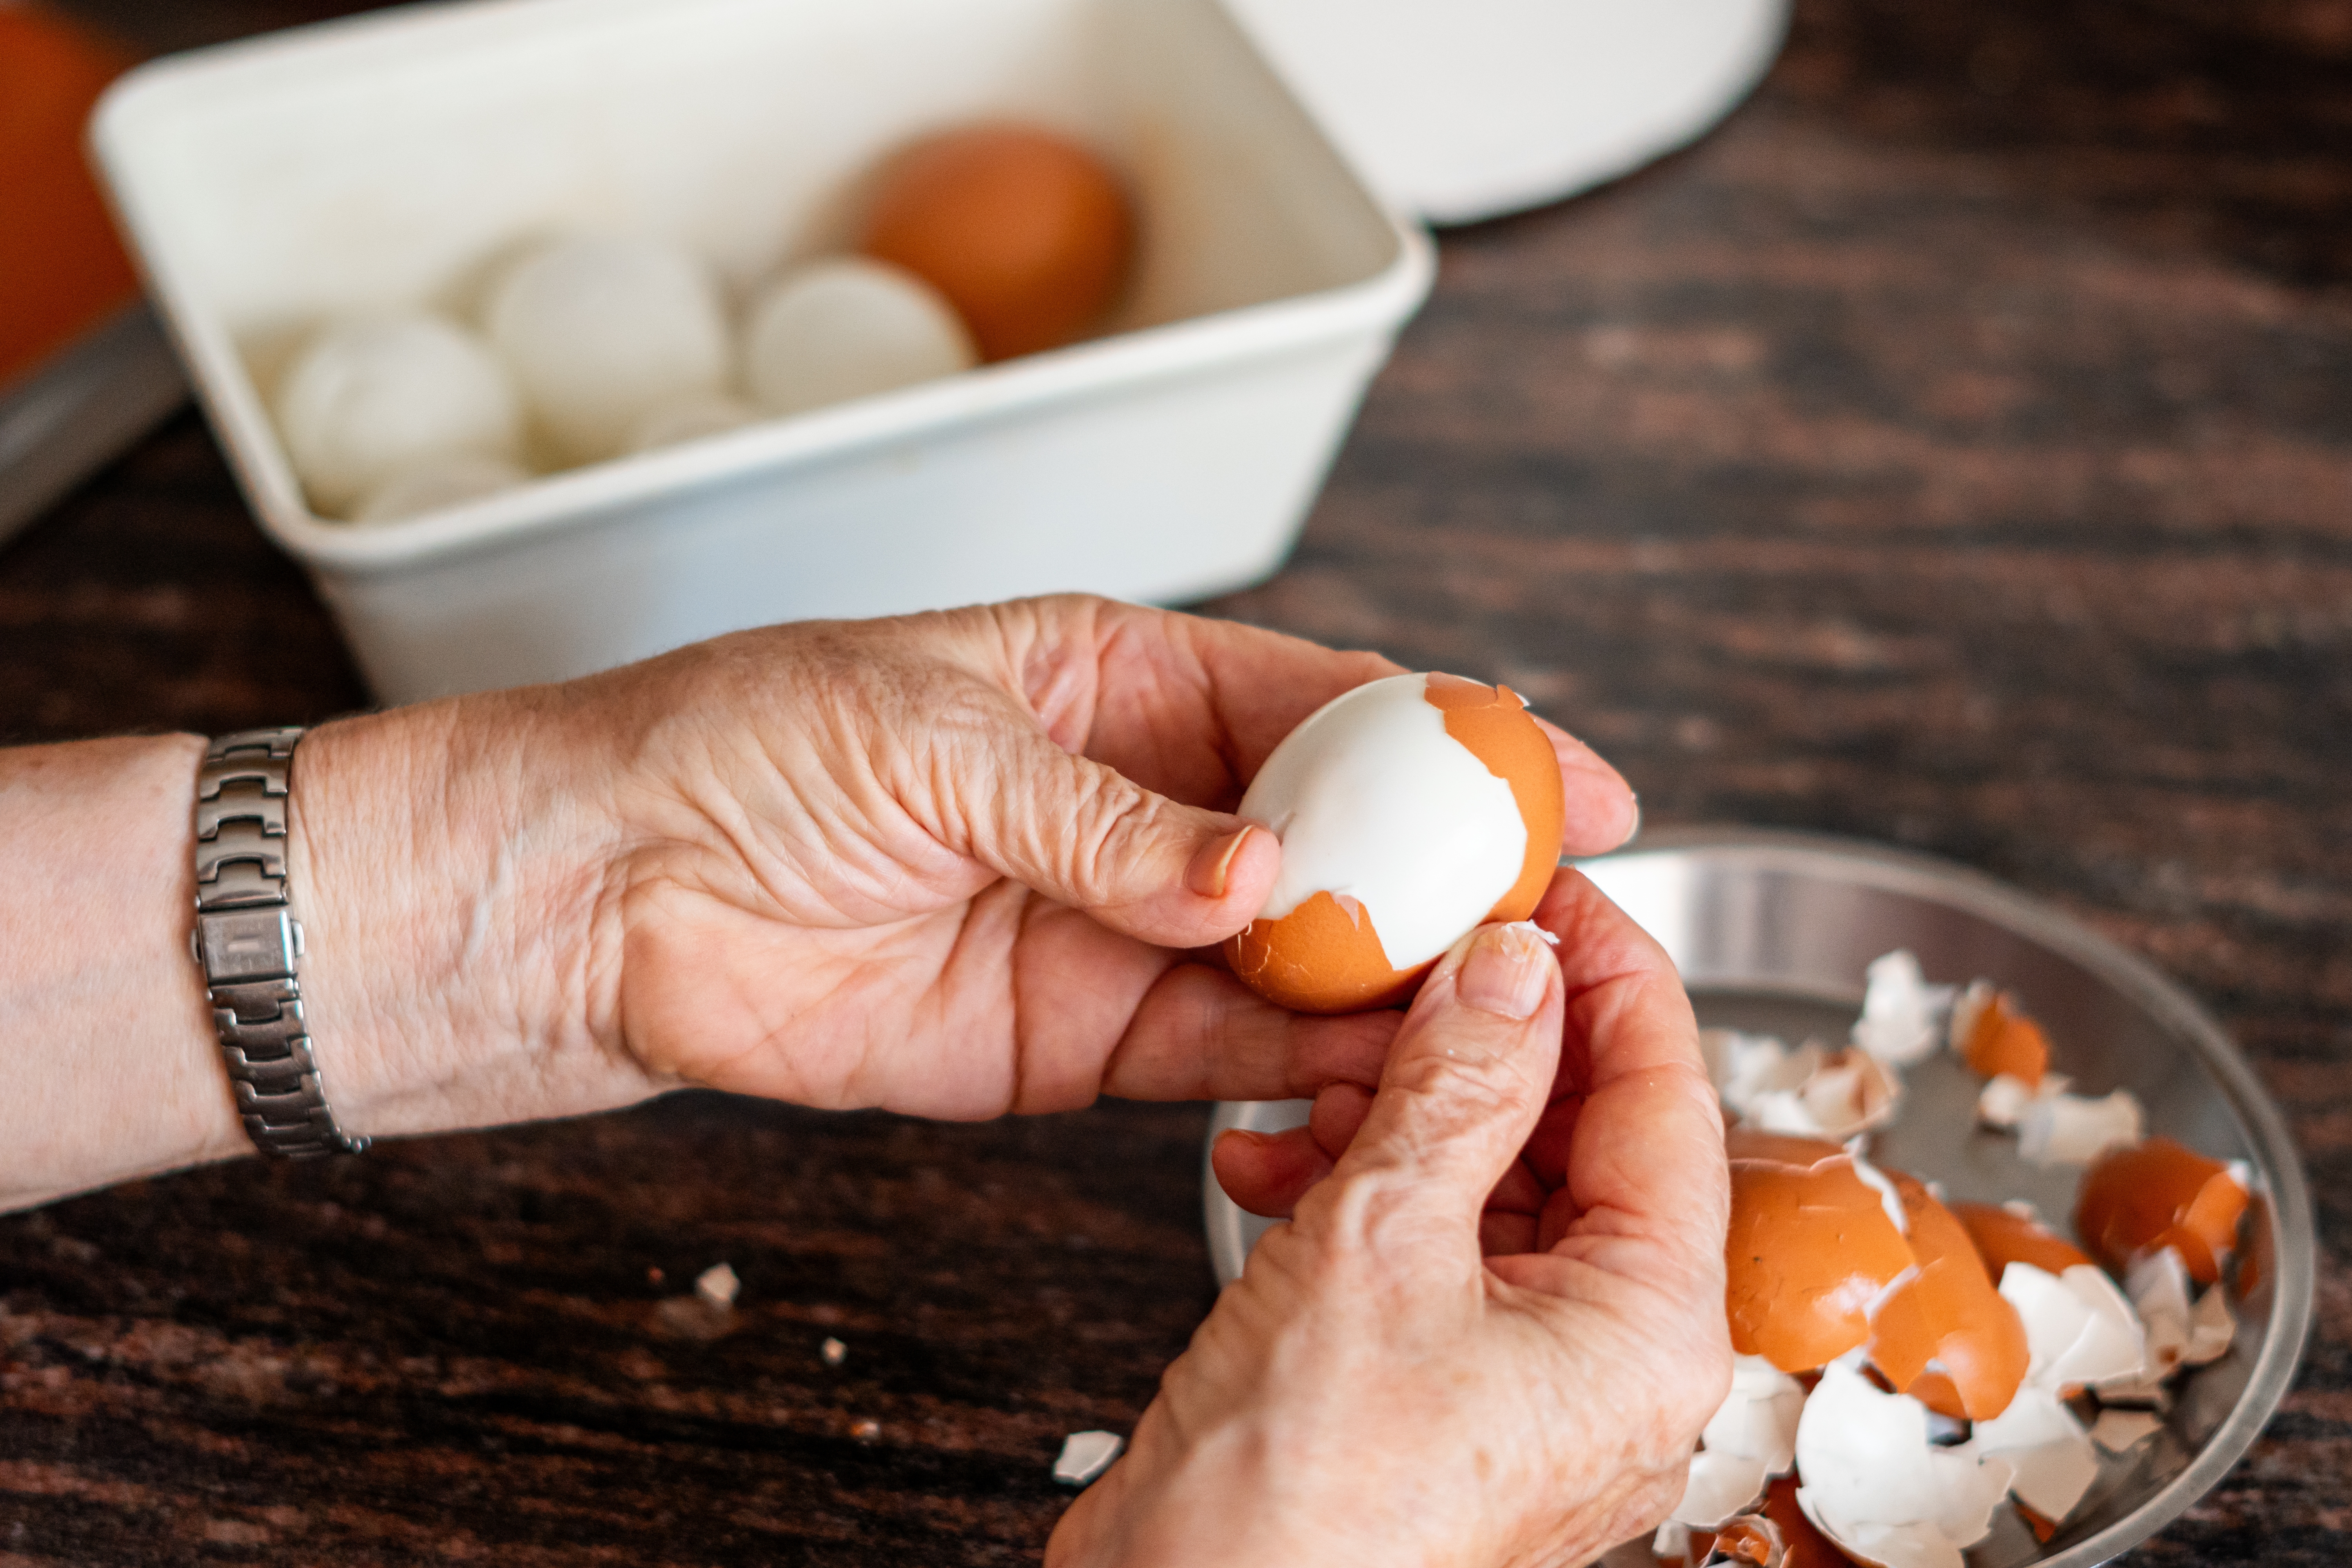 Once your eggs are cool, remove the shells. | Source: Shutterstock